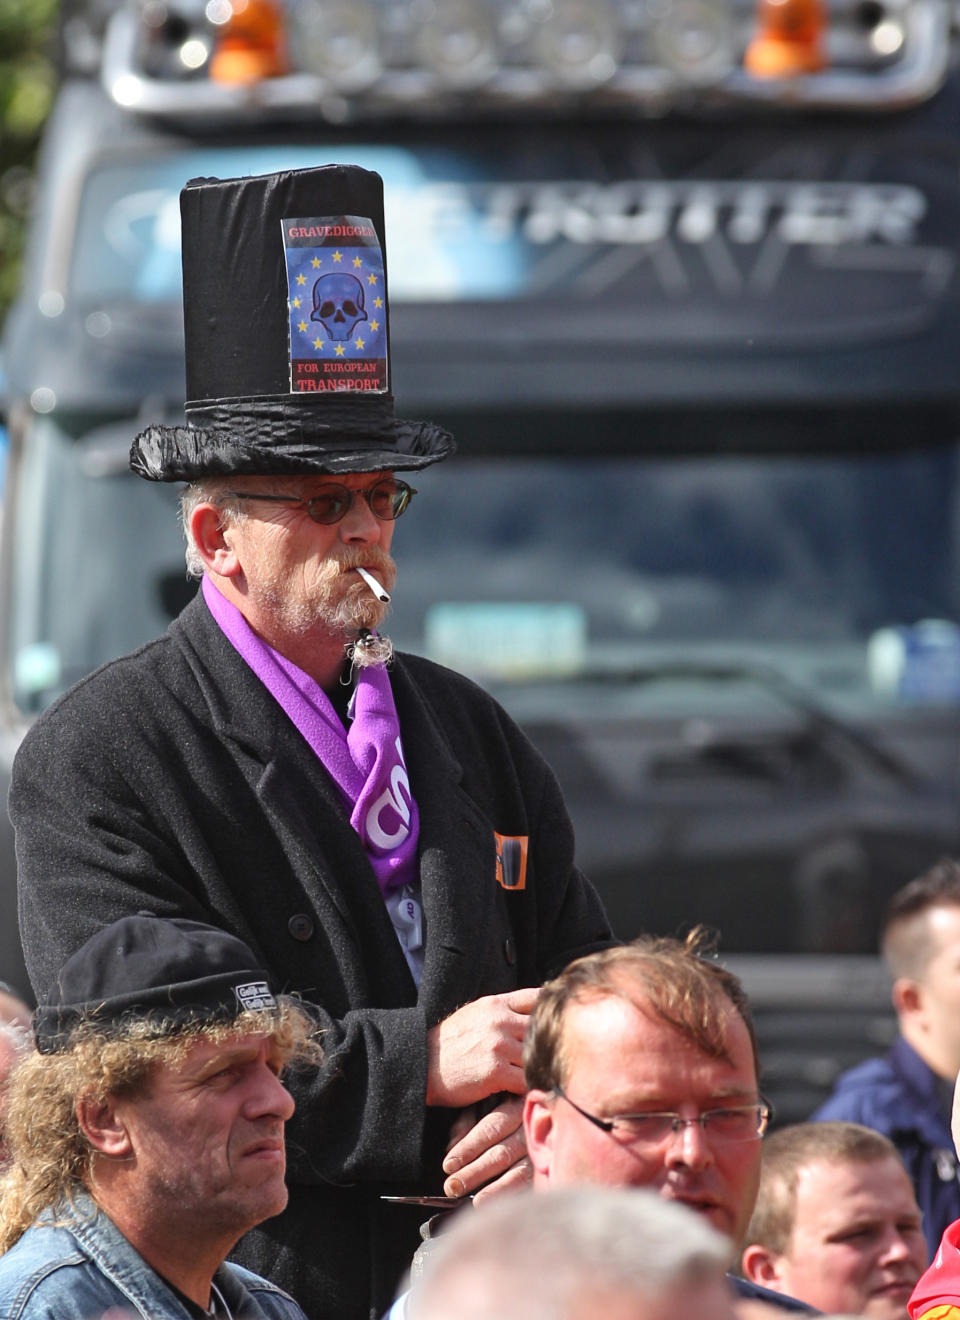 A trucker on stilts wears a high hat with a sticker that reads: 'Gravedigger for European Transport', during a protest in Brussels, Monday, Sept. 24, 2012. Truckers seek to disrupt morning traffic heading into the capital to protest competition from eastern Europe, which undercuts prices and lowers labor standards. (AP Photo/Yves Logghe)